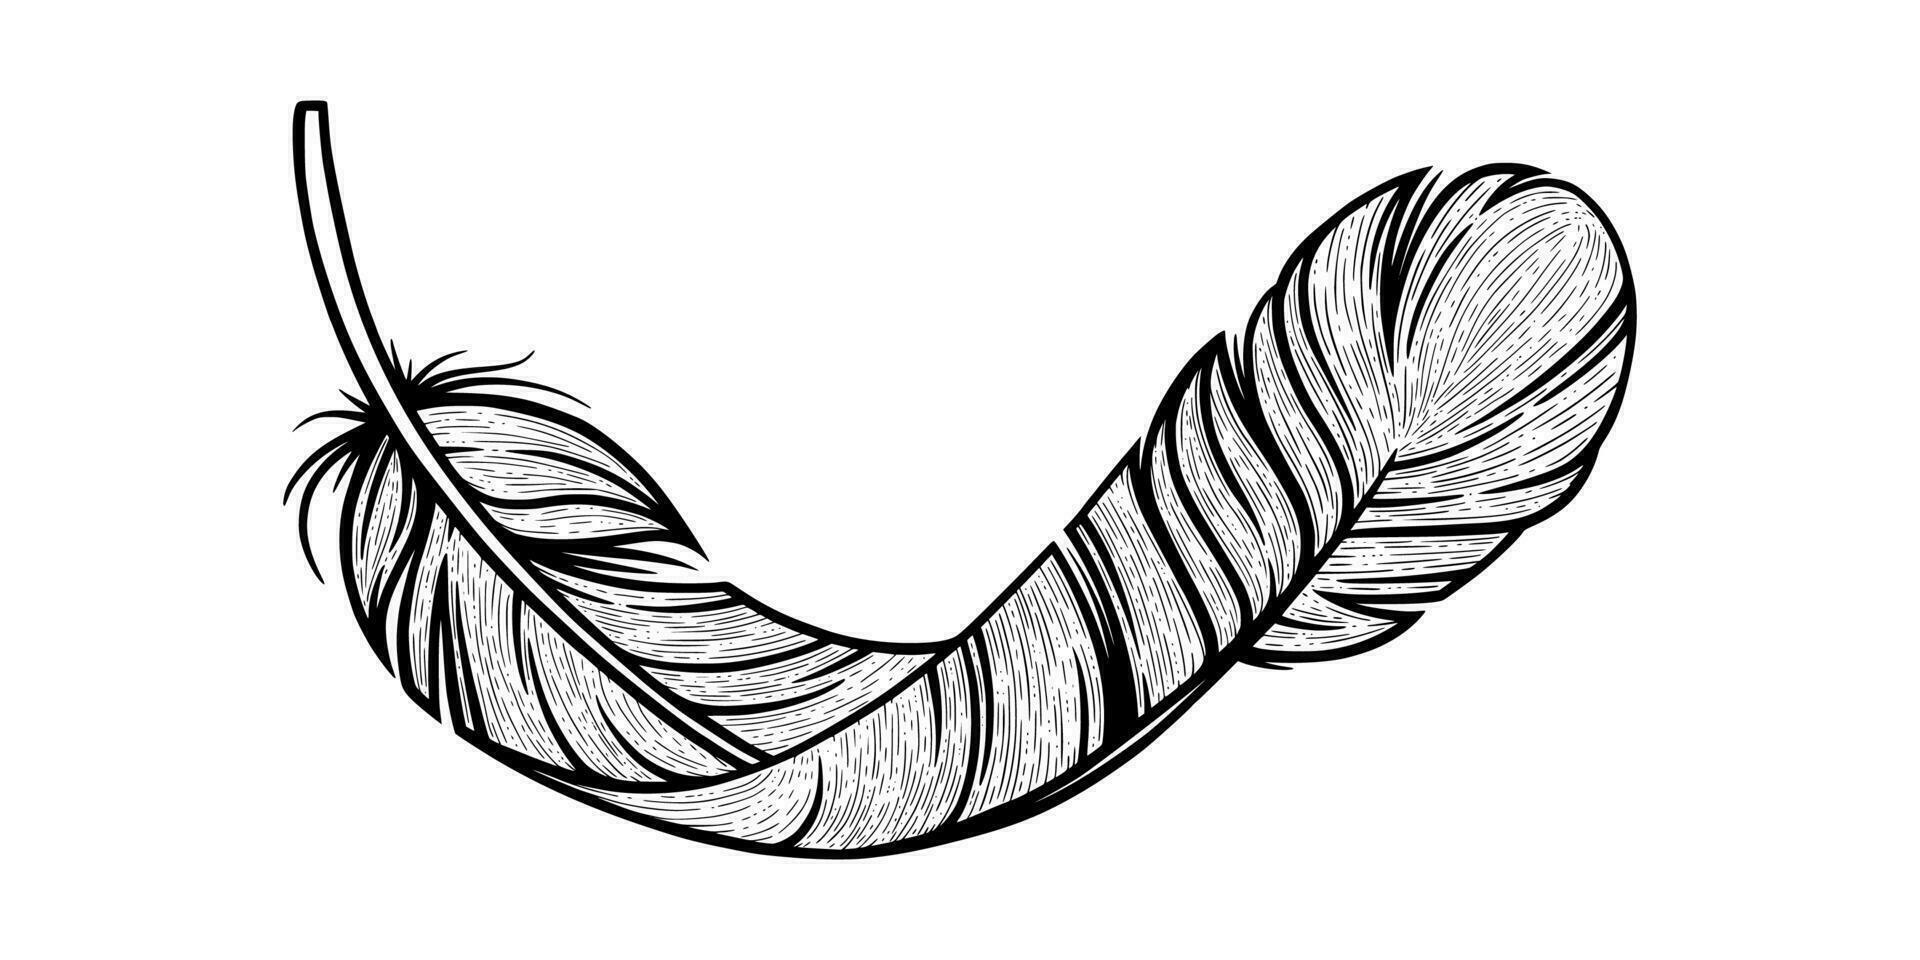 Bird feather sketch. Vintage decorative feather isolated in white background. Vector illustration